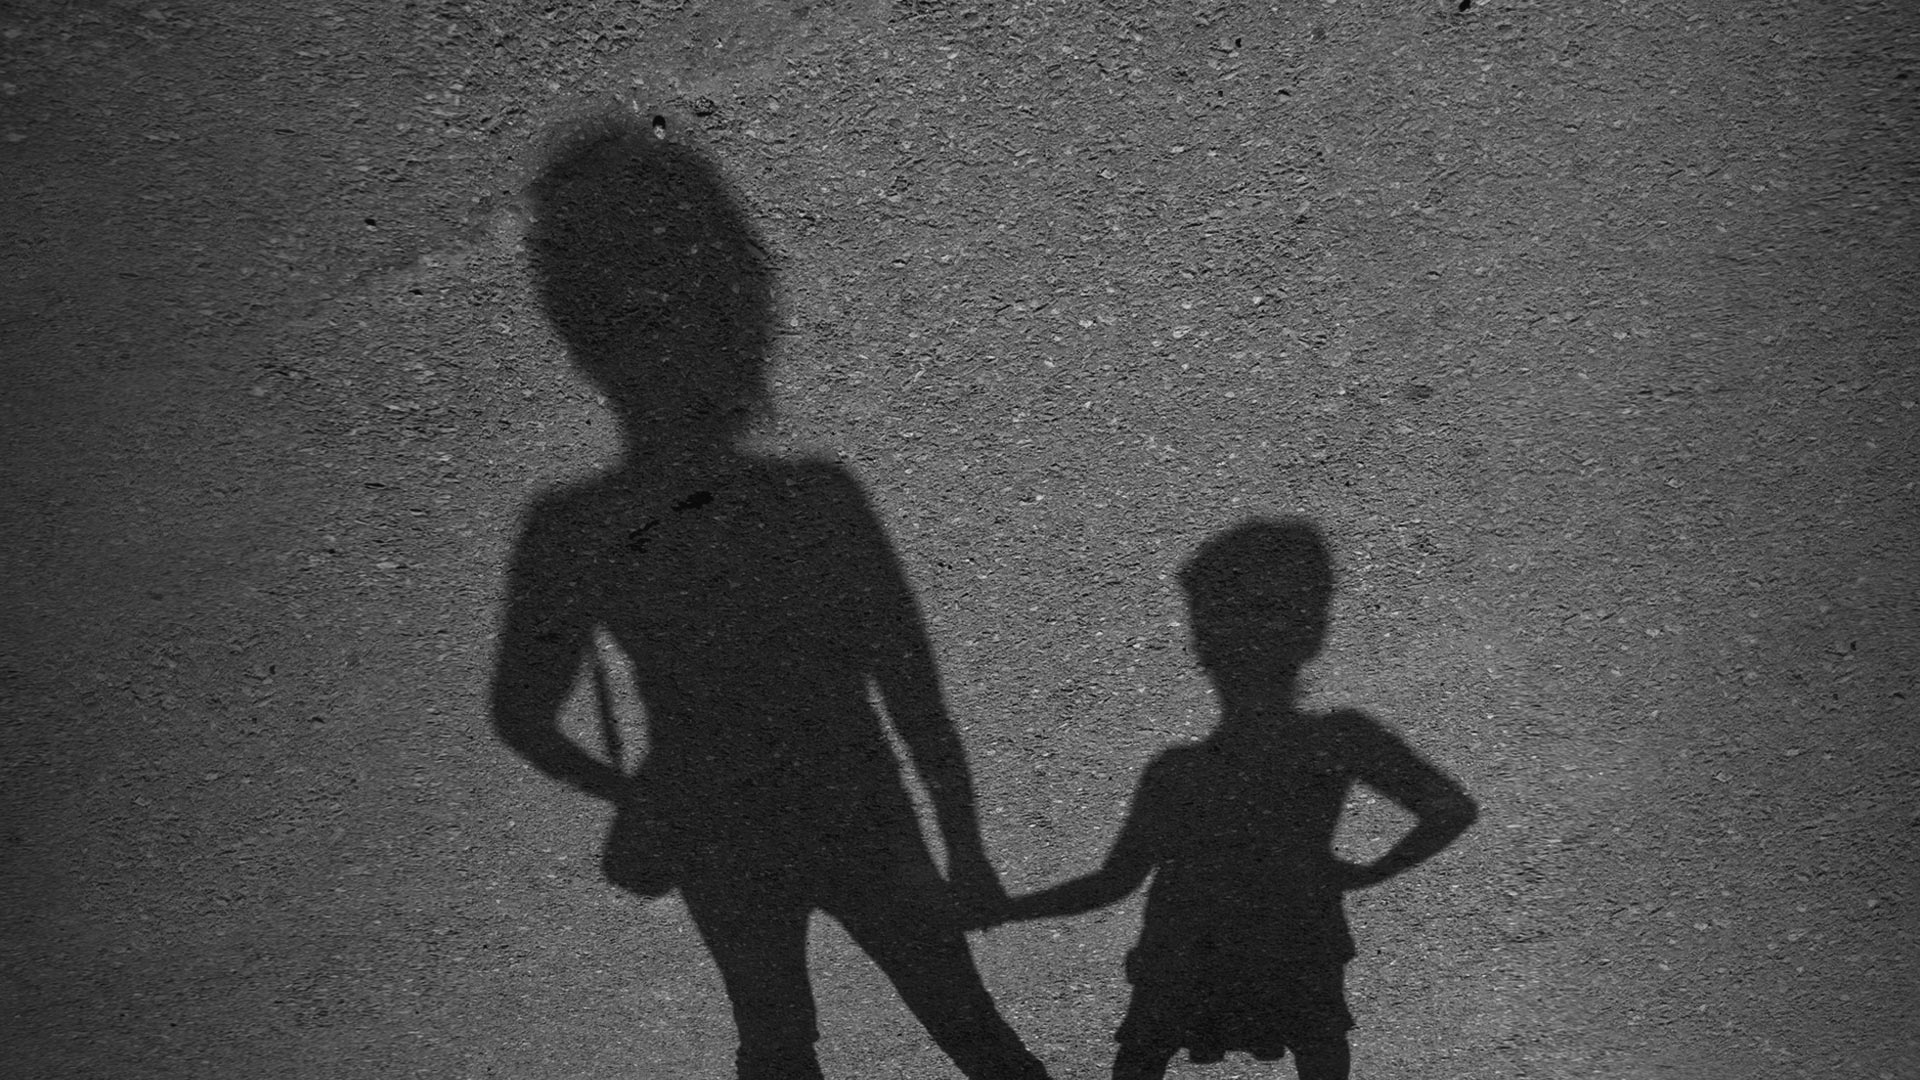 Mother and daughter shadows